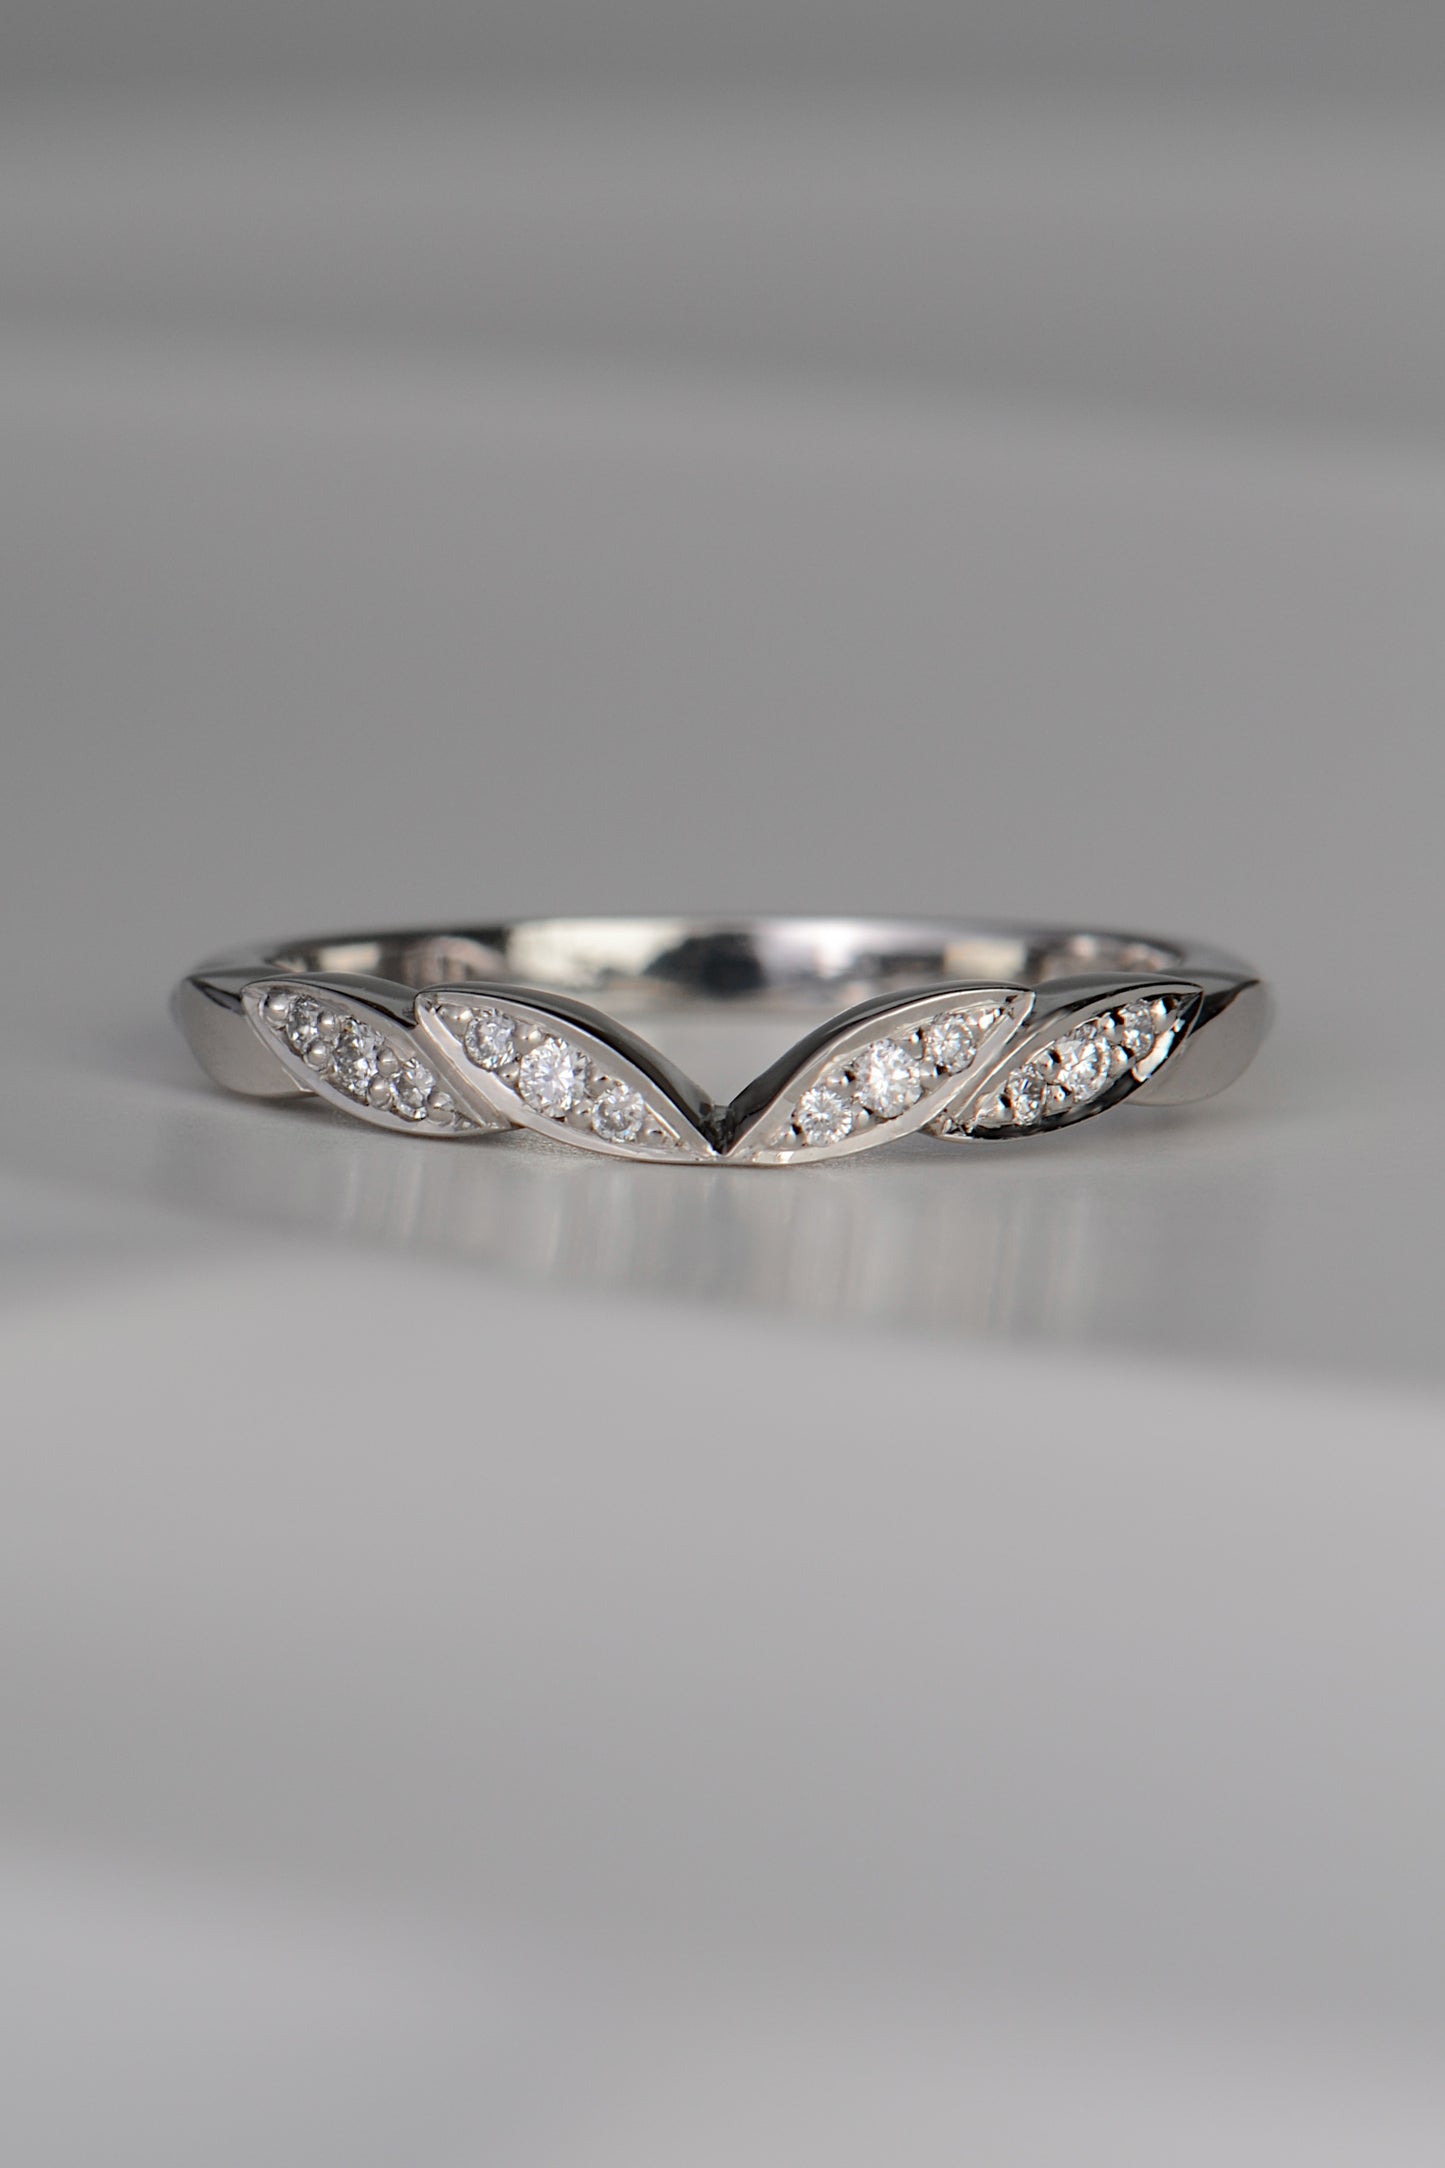 handmade platinum wedding ring with four leaf details at the front with three diamonds set in each leaf. Handmade in the UK